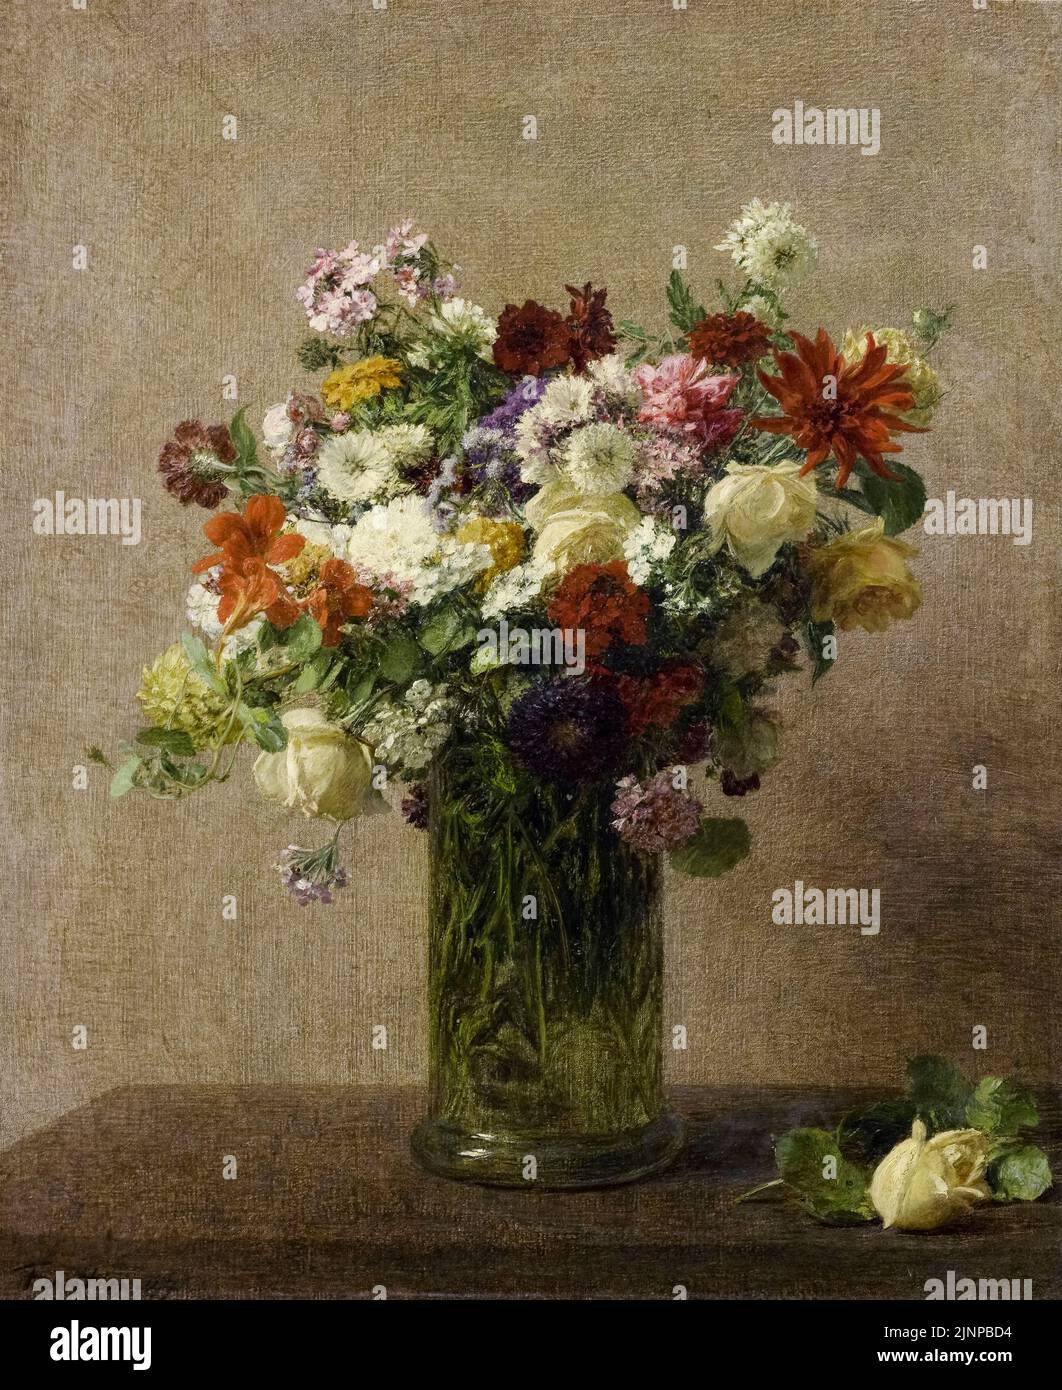 Henri Fantin Latour, Flowers from Normandy, still life painting in oil on canvas, 1887 Stock Photo